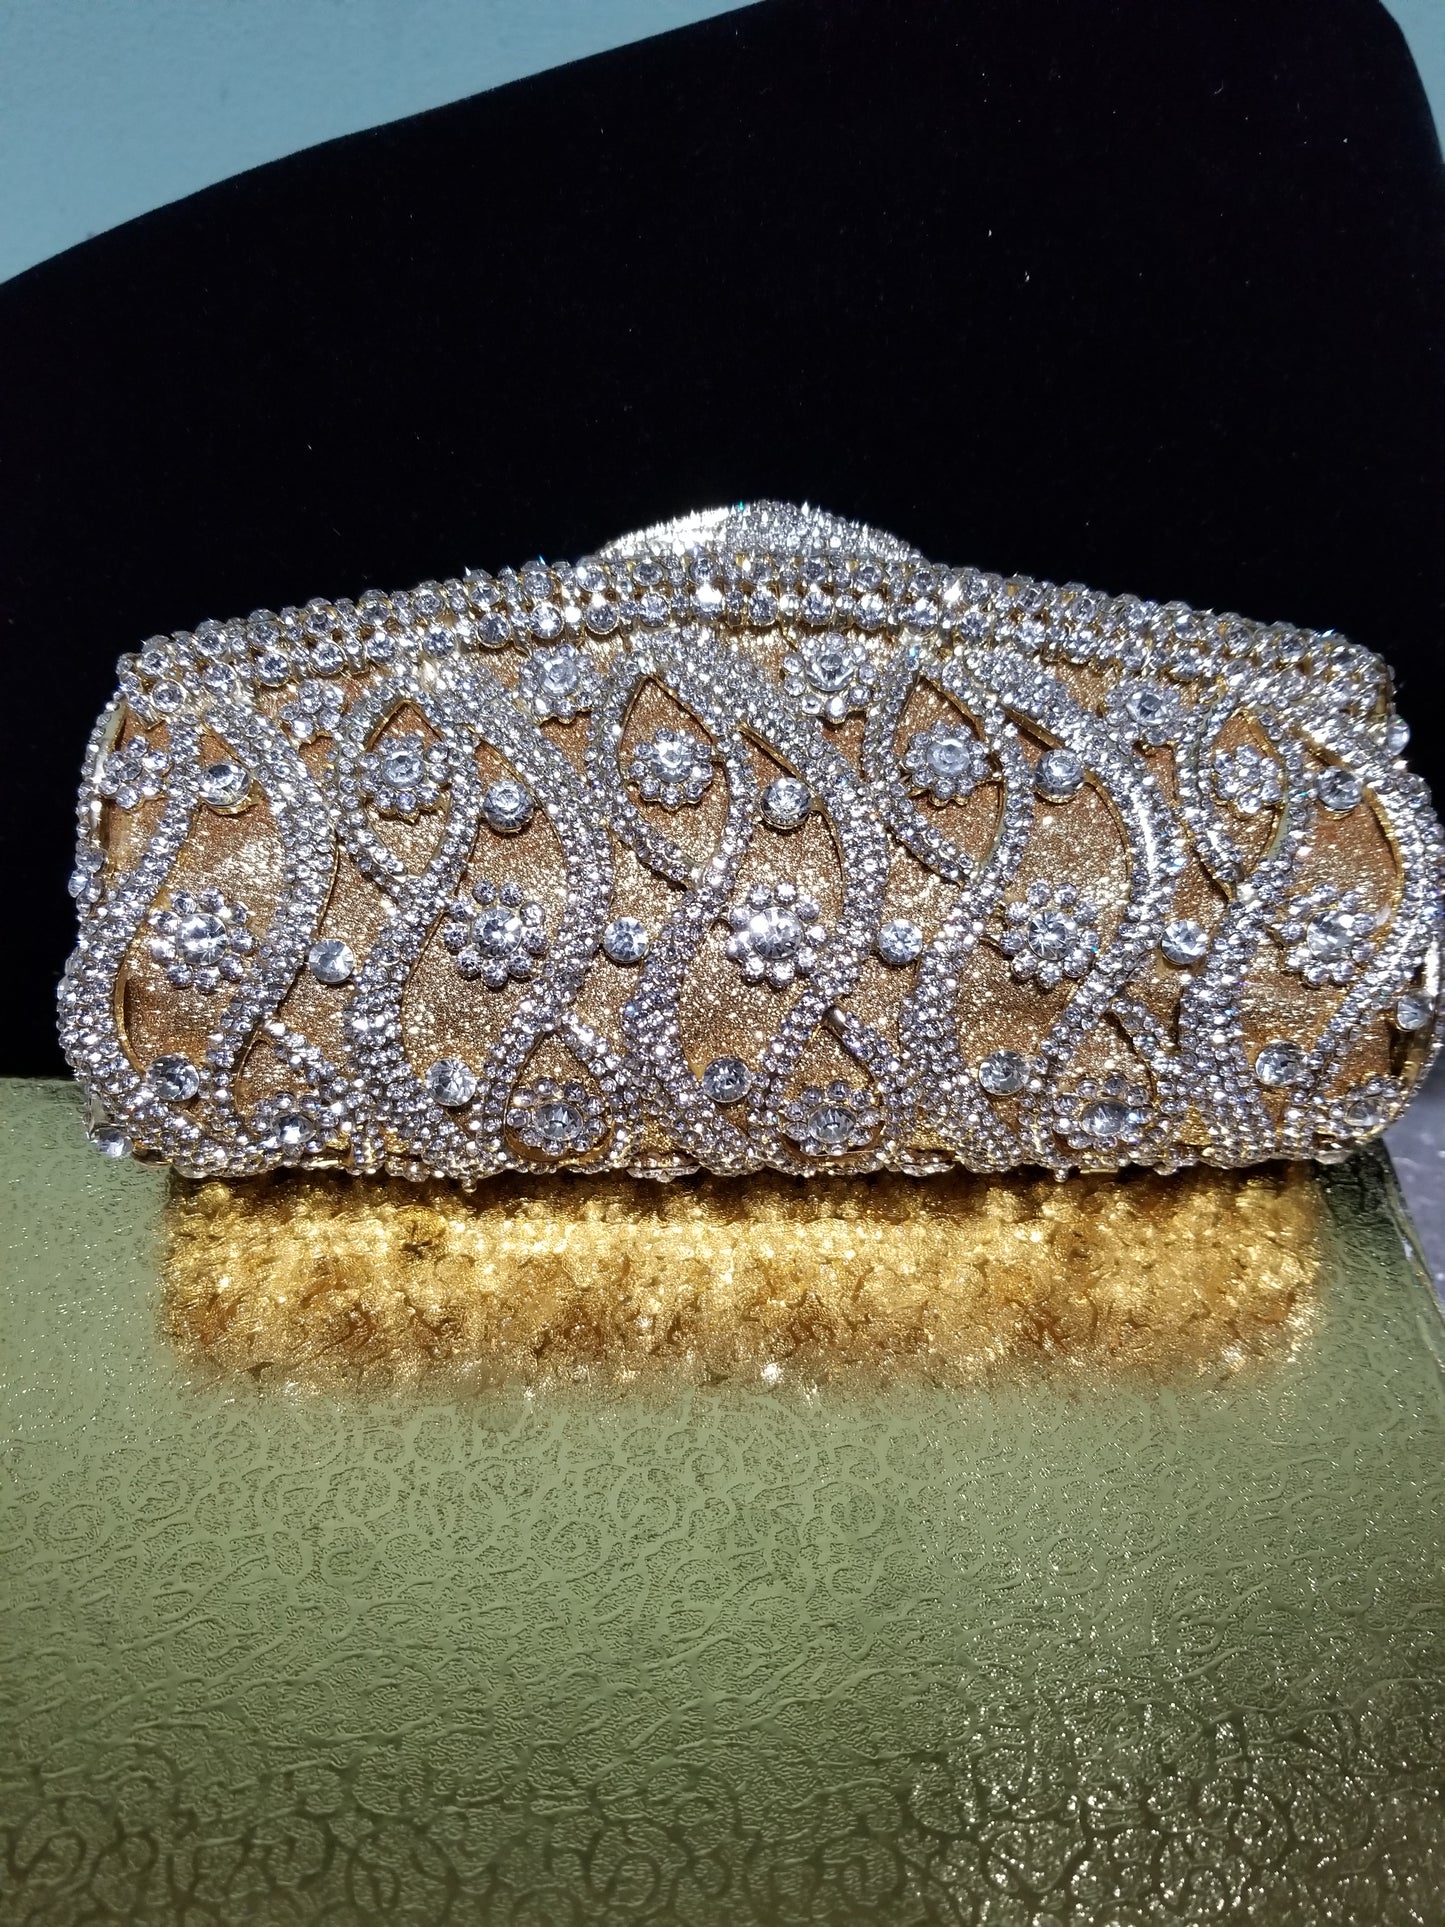 Sale Quality evening hand clutch. Crystal Clutch/purse. 8" long x 5" wide. All over dazzling crystal stones. Gold/silver crystal stones